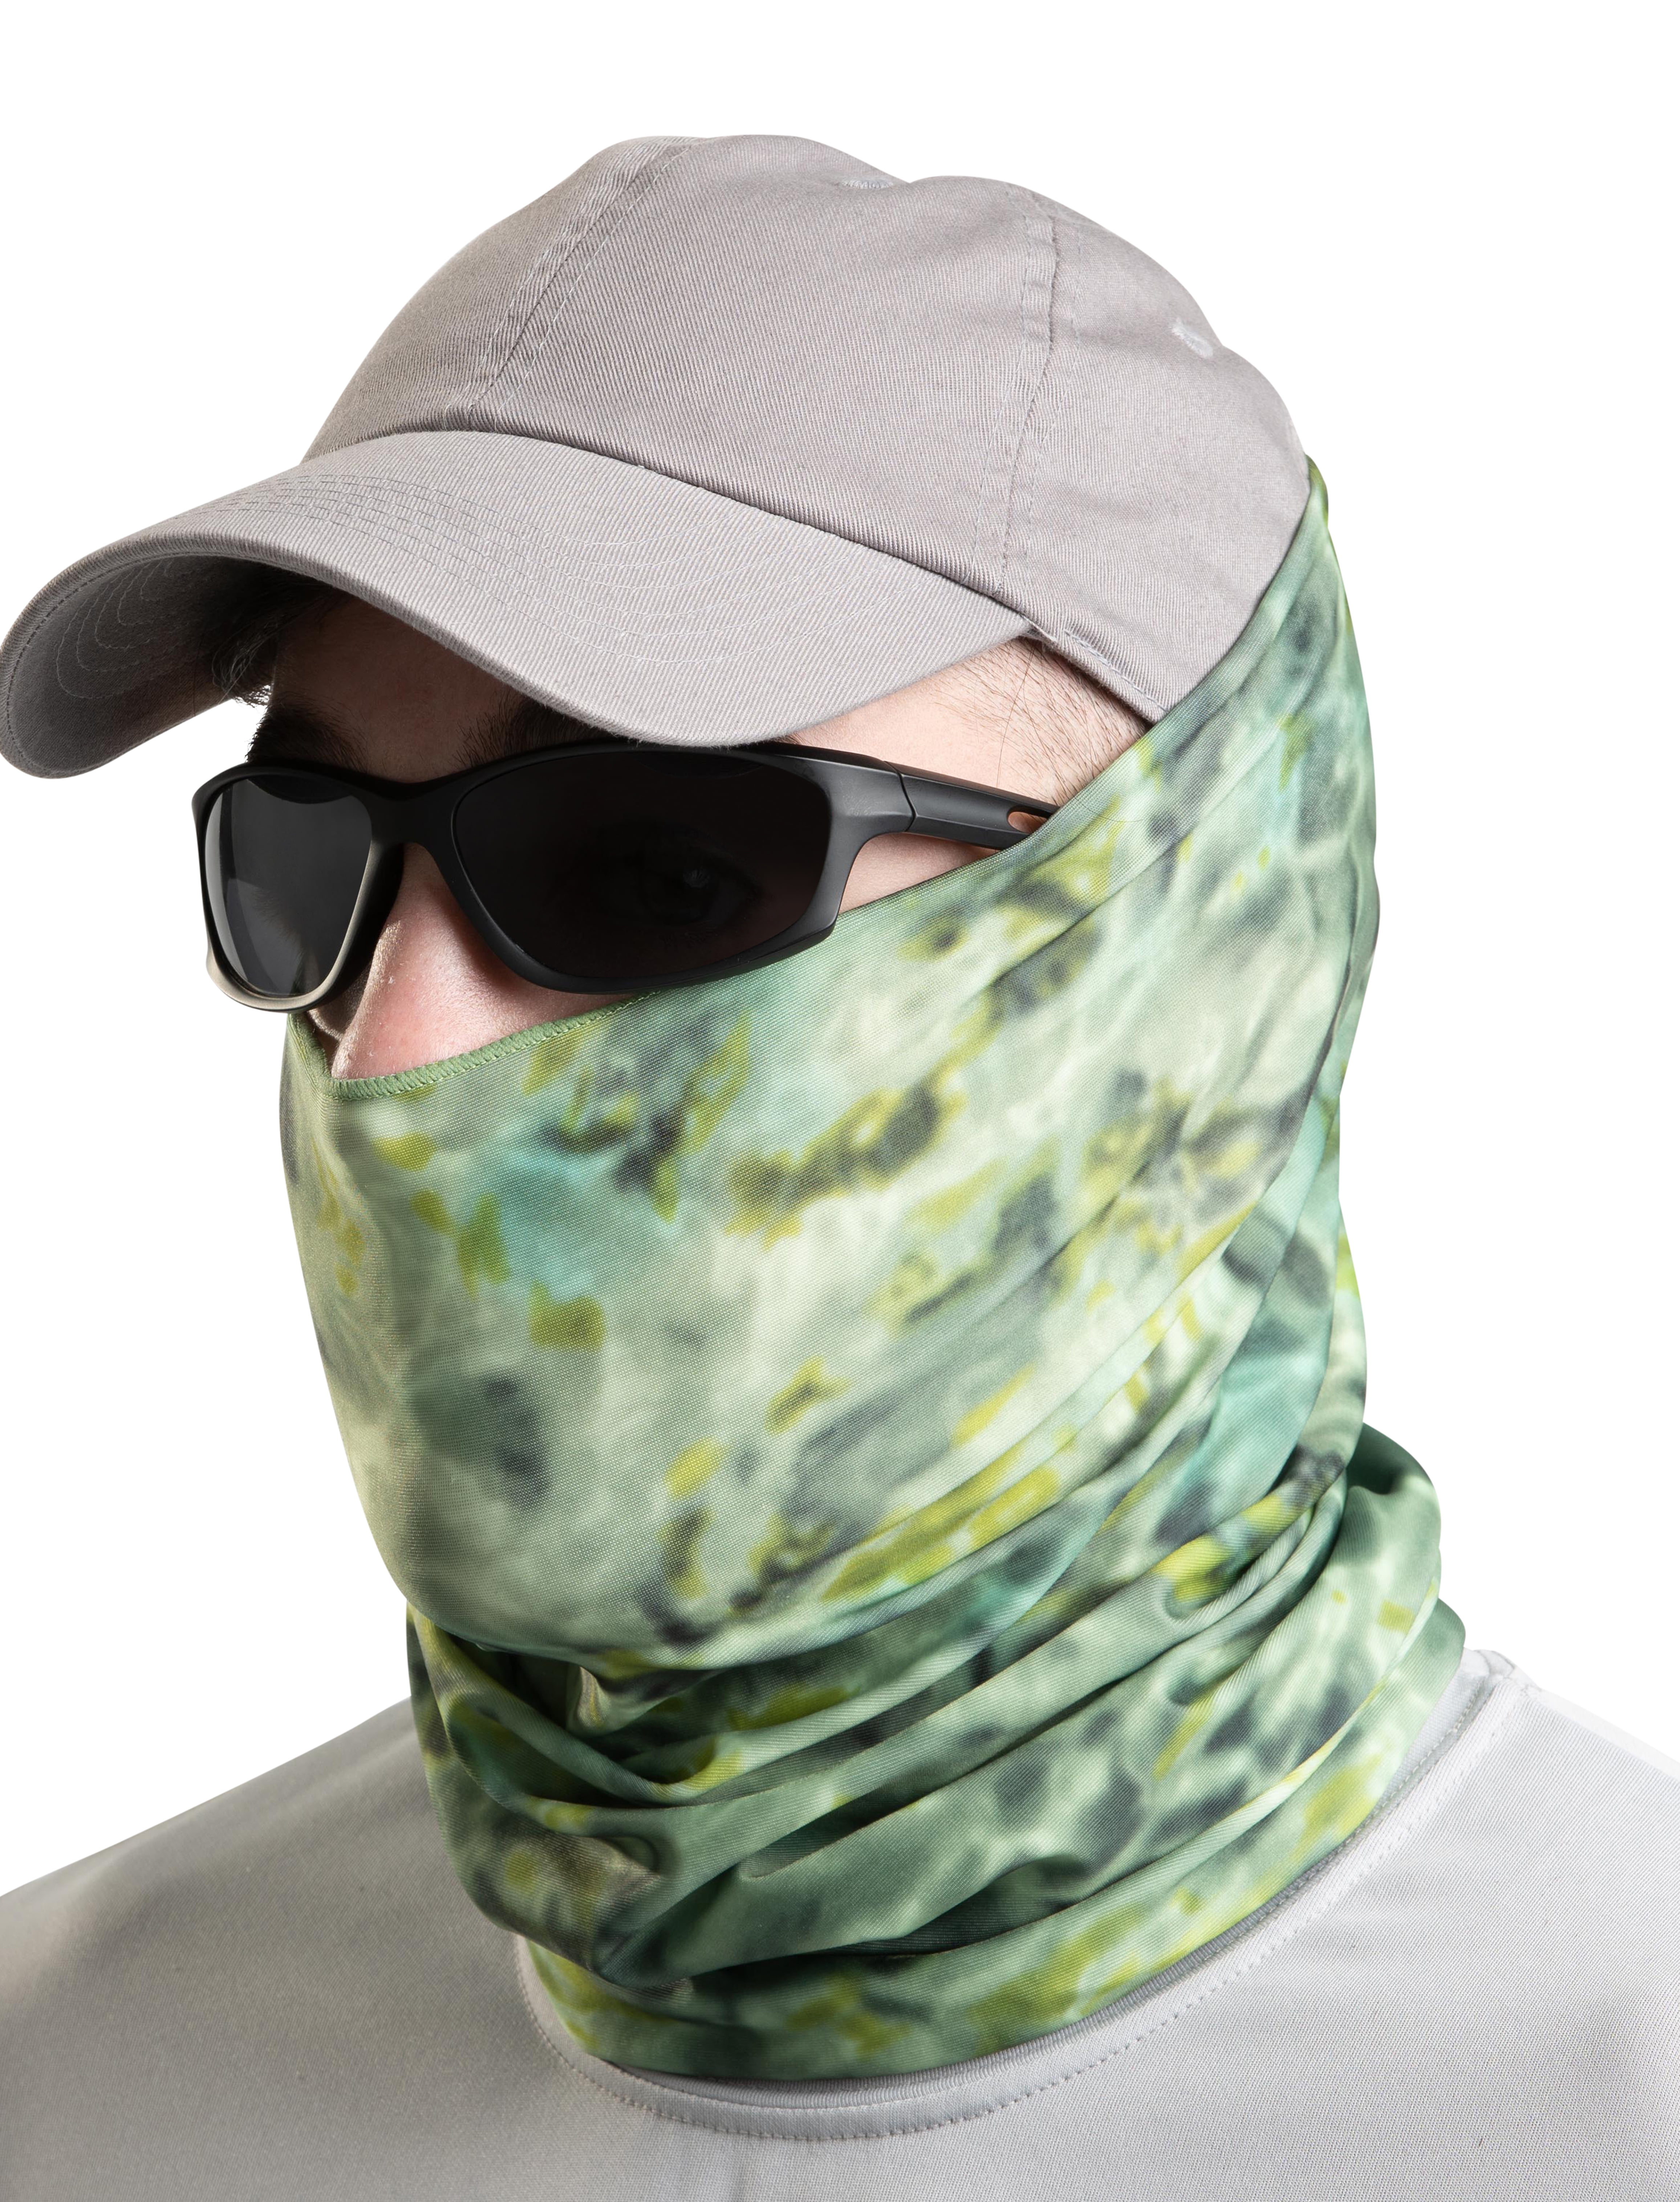 Dust Sun Protection Neck Gaiter Face Mask Headwear for Fishing Hunting Yard Work 